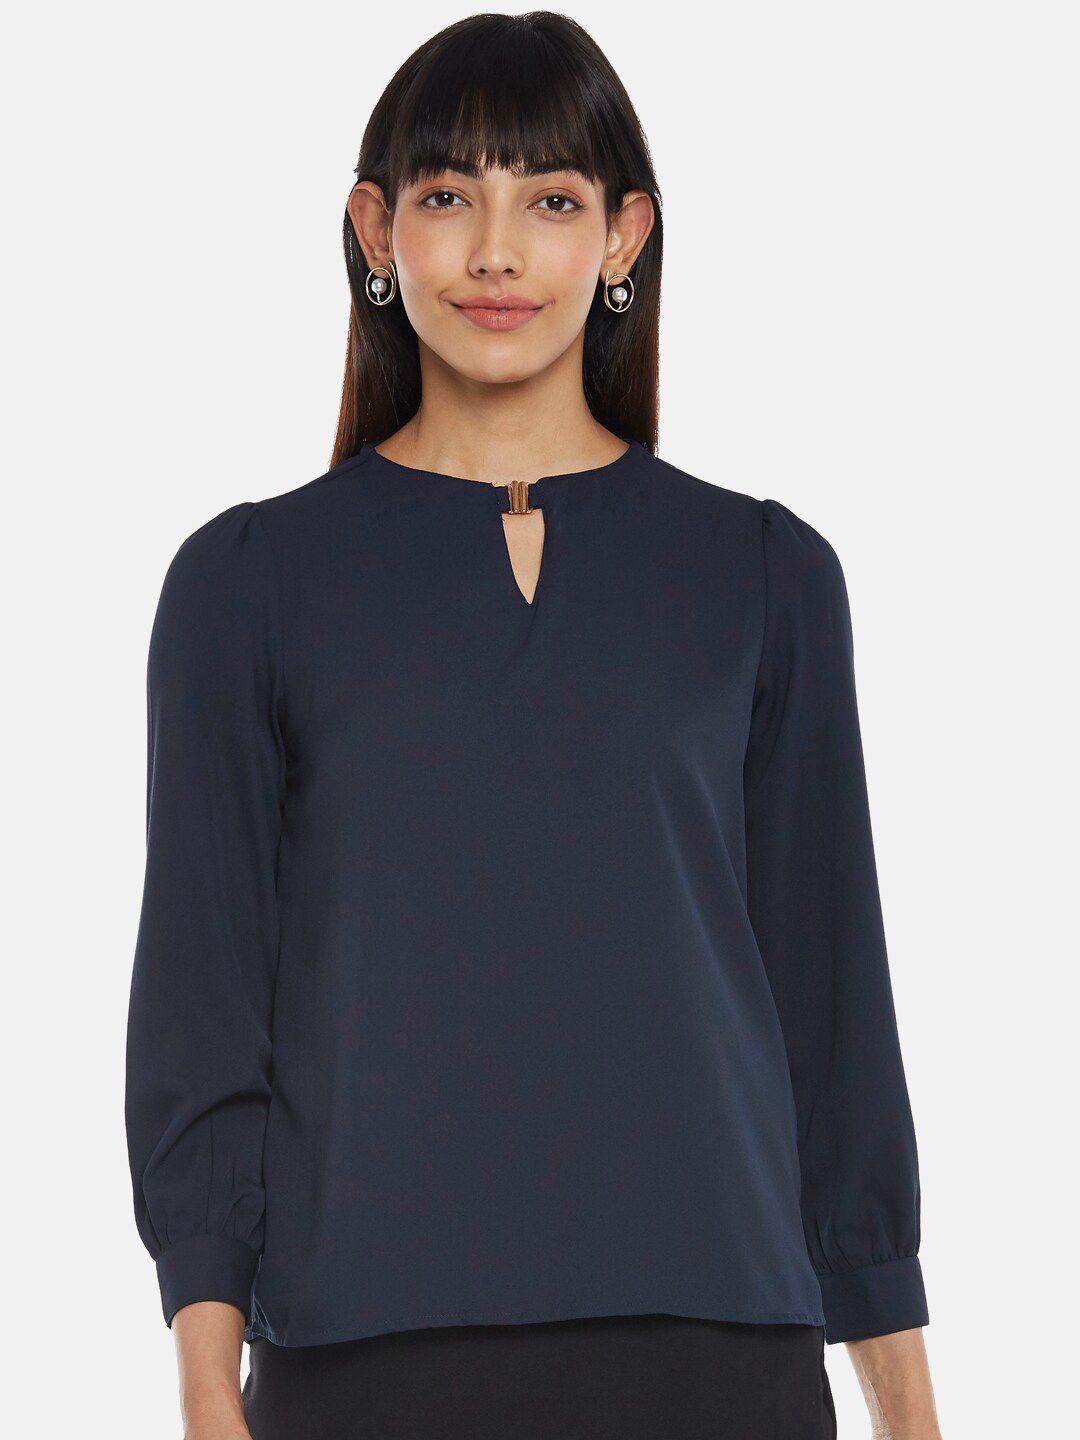 annabelle by pantaloons navy blue keyhole neck top